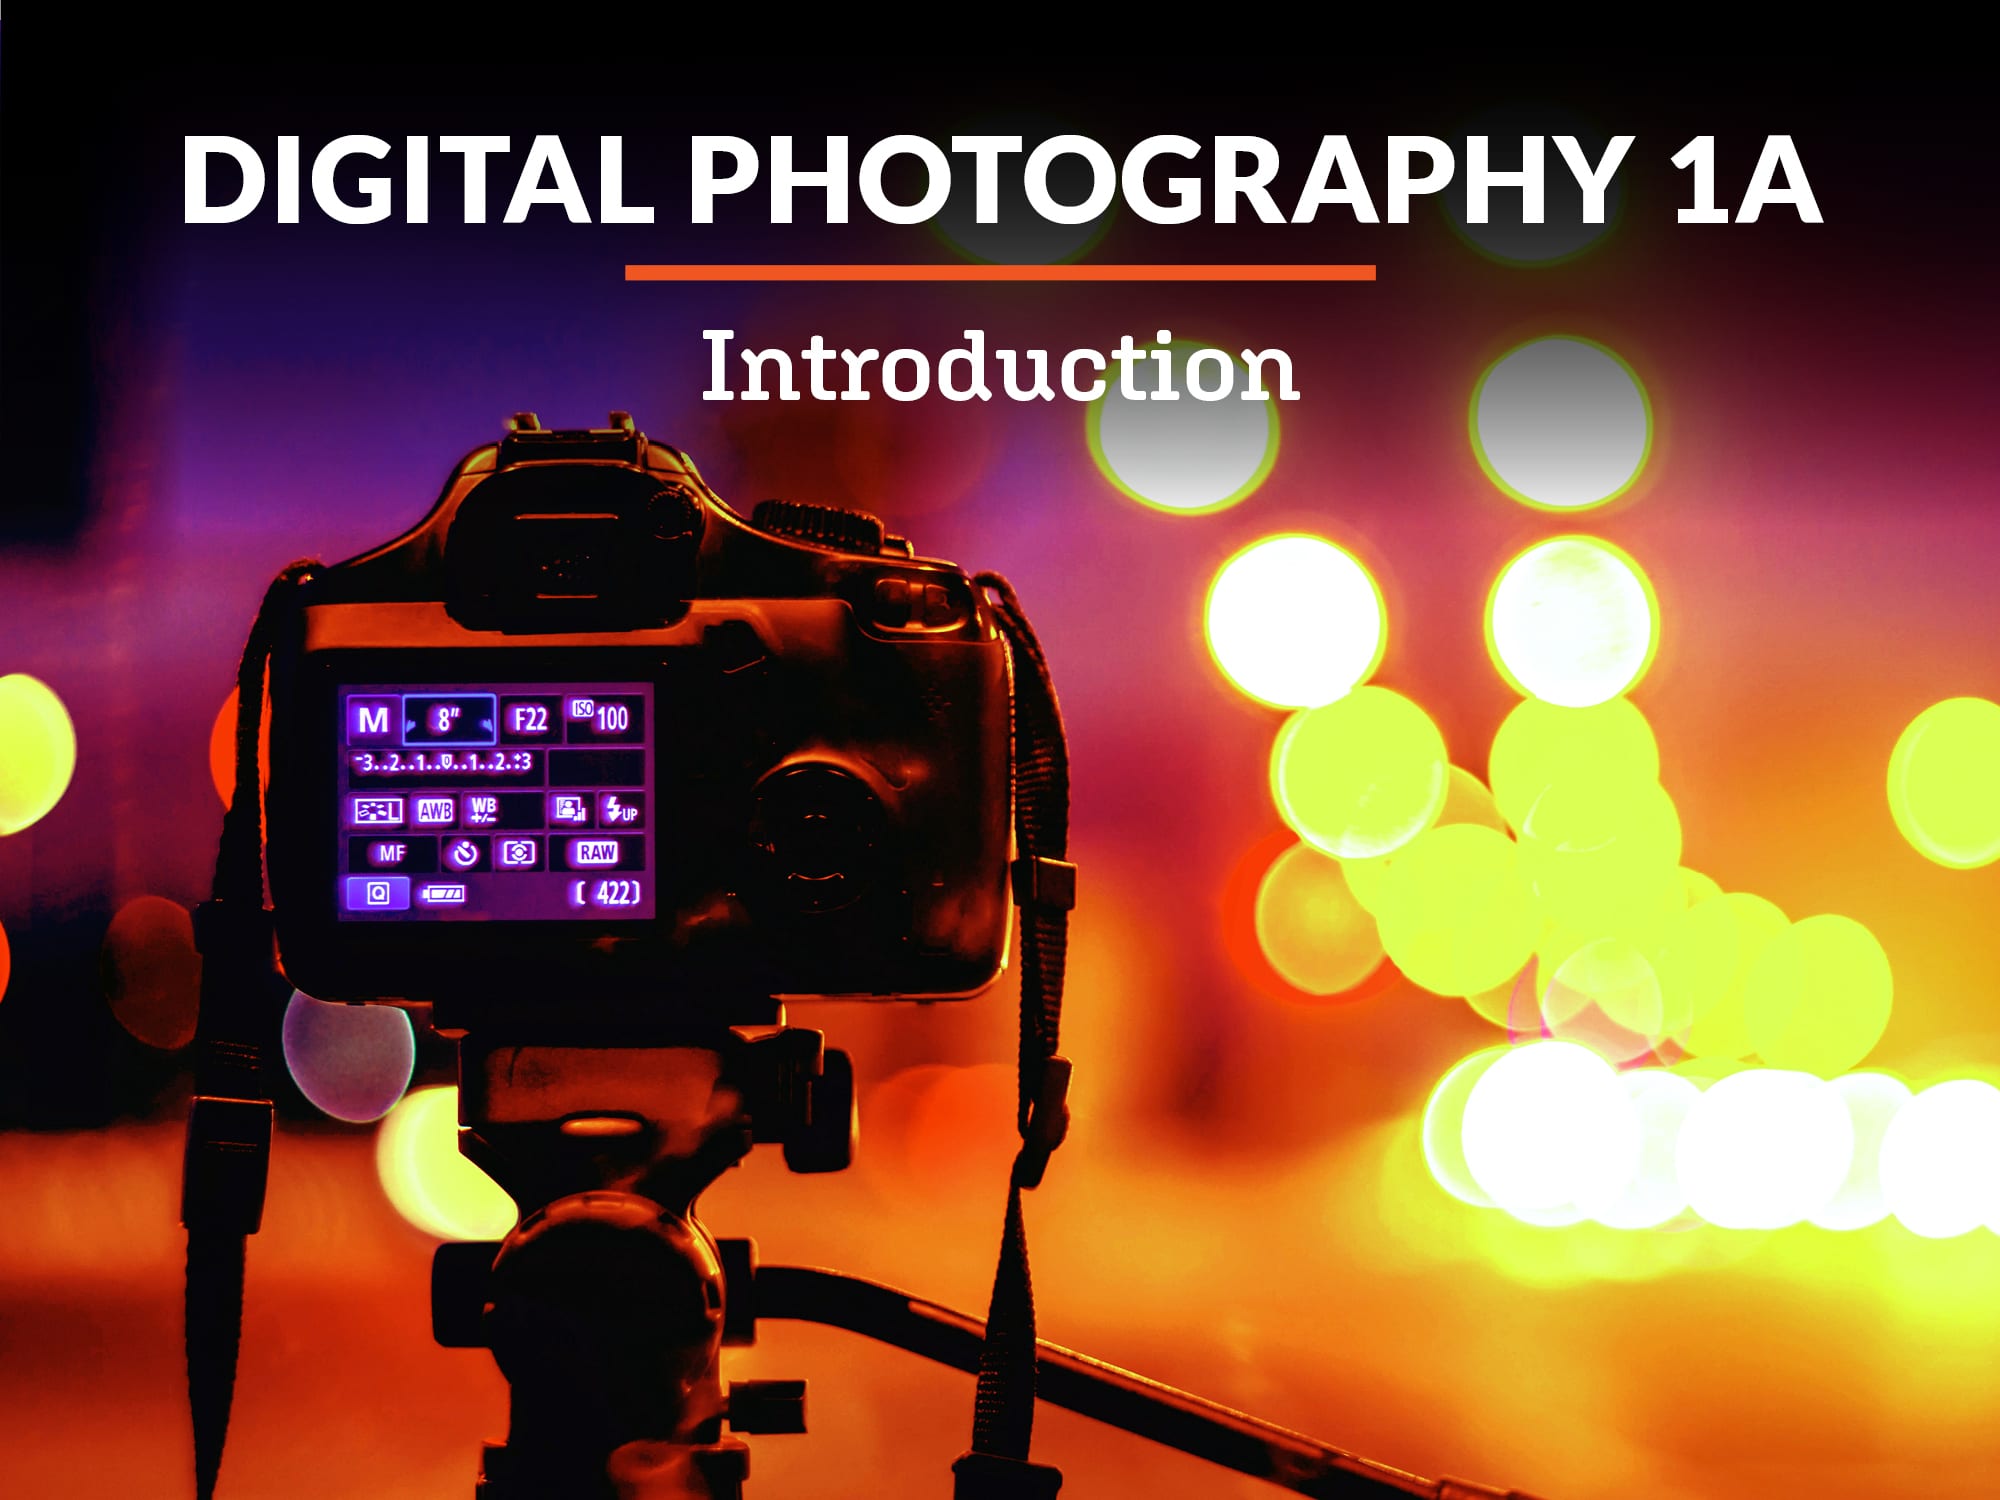 Digital Photography 1a: Introduction